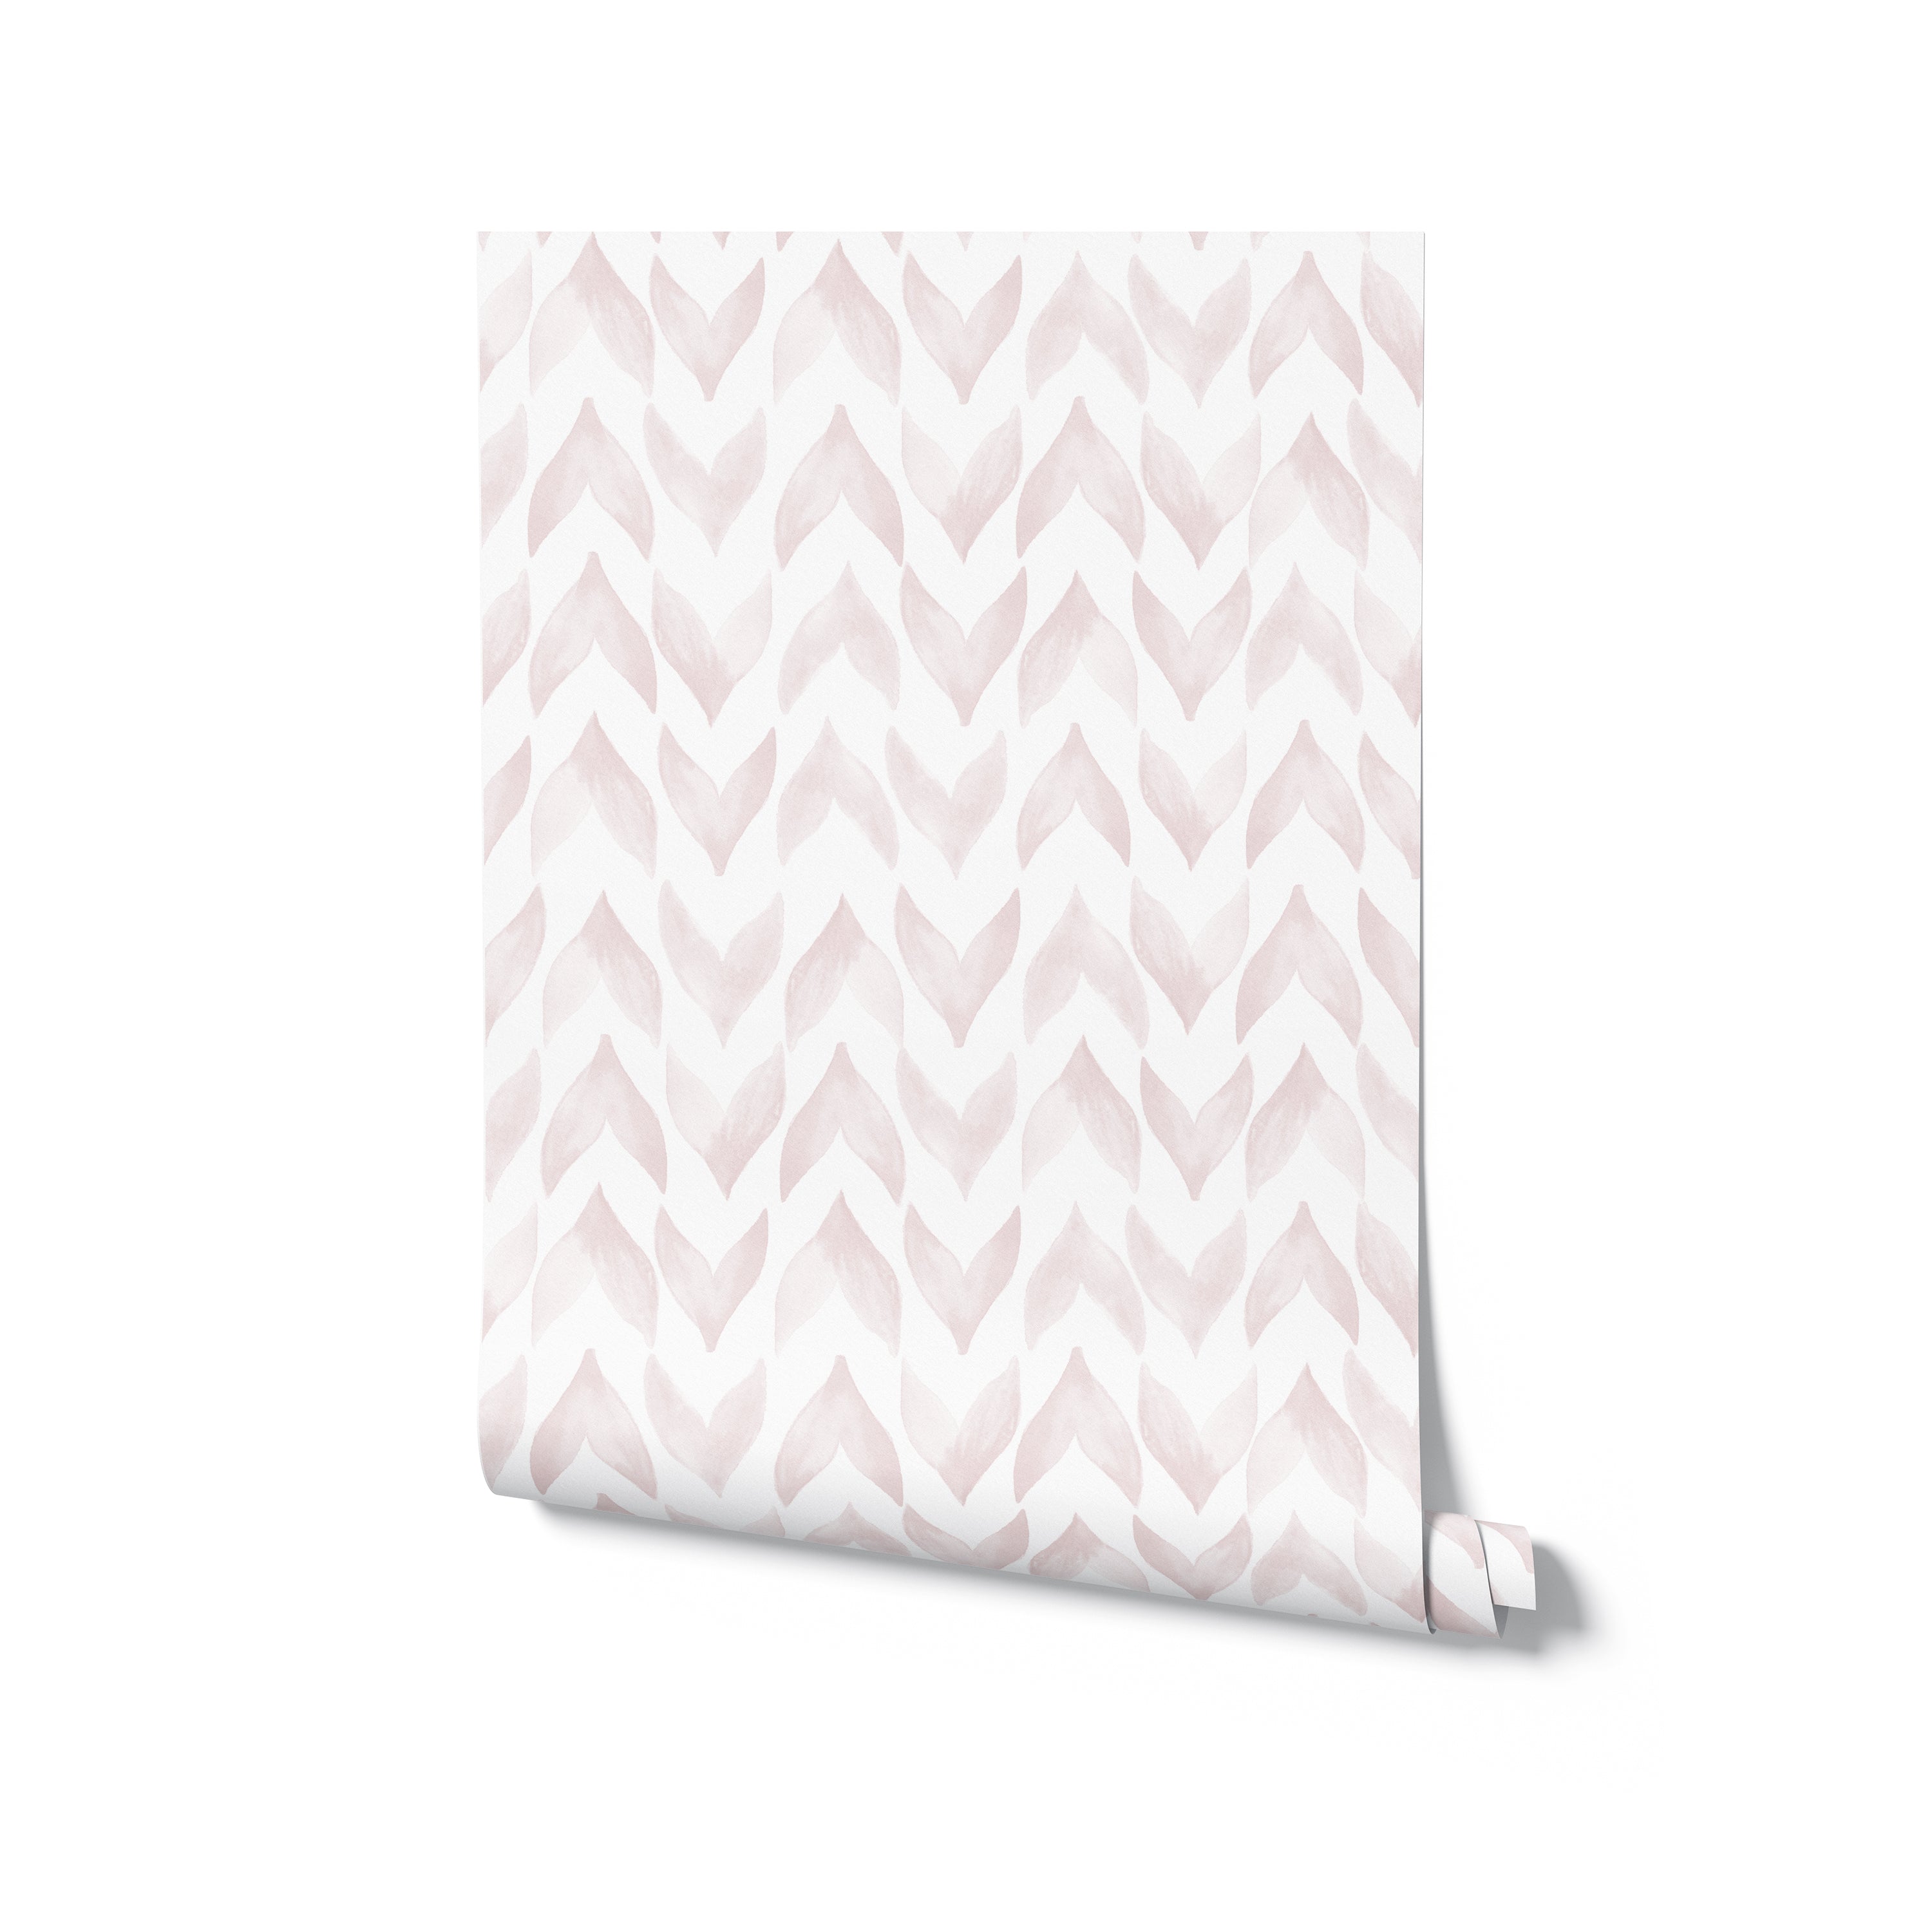 A rolled-up wallpaper sample revealing the Moroccan Tile pattern, which consists of white and nude watercolor zigzag shapes, giving a sophisticated and contemporary feel to the design.